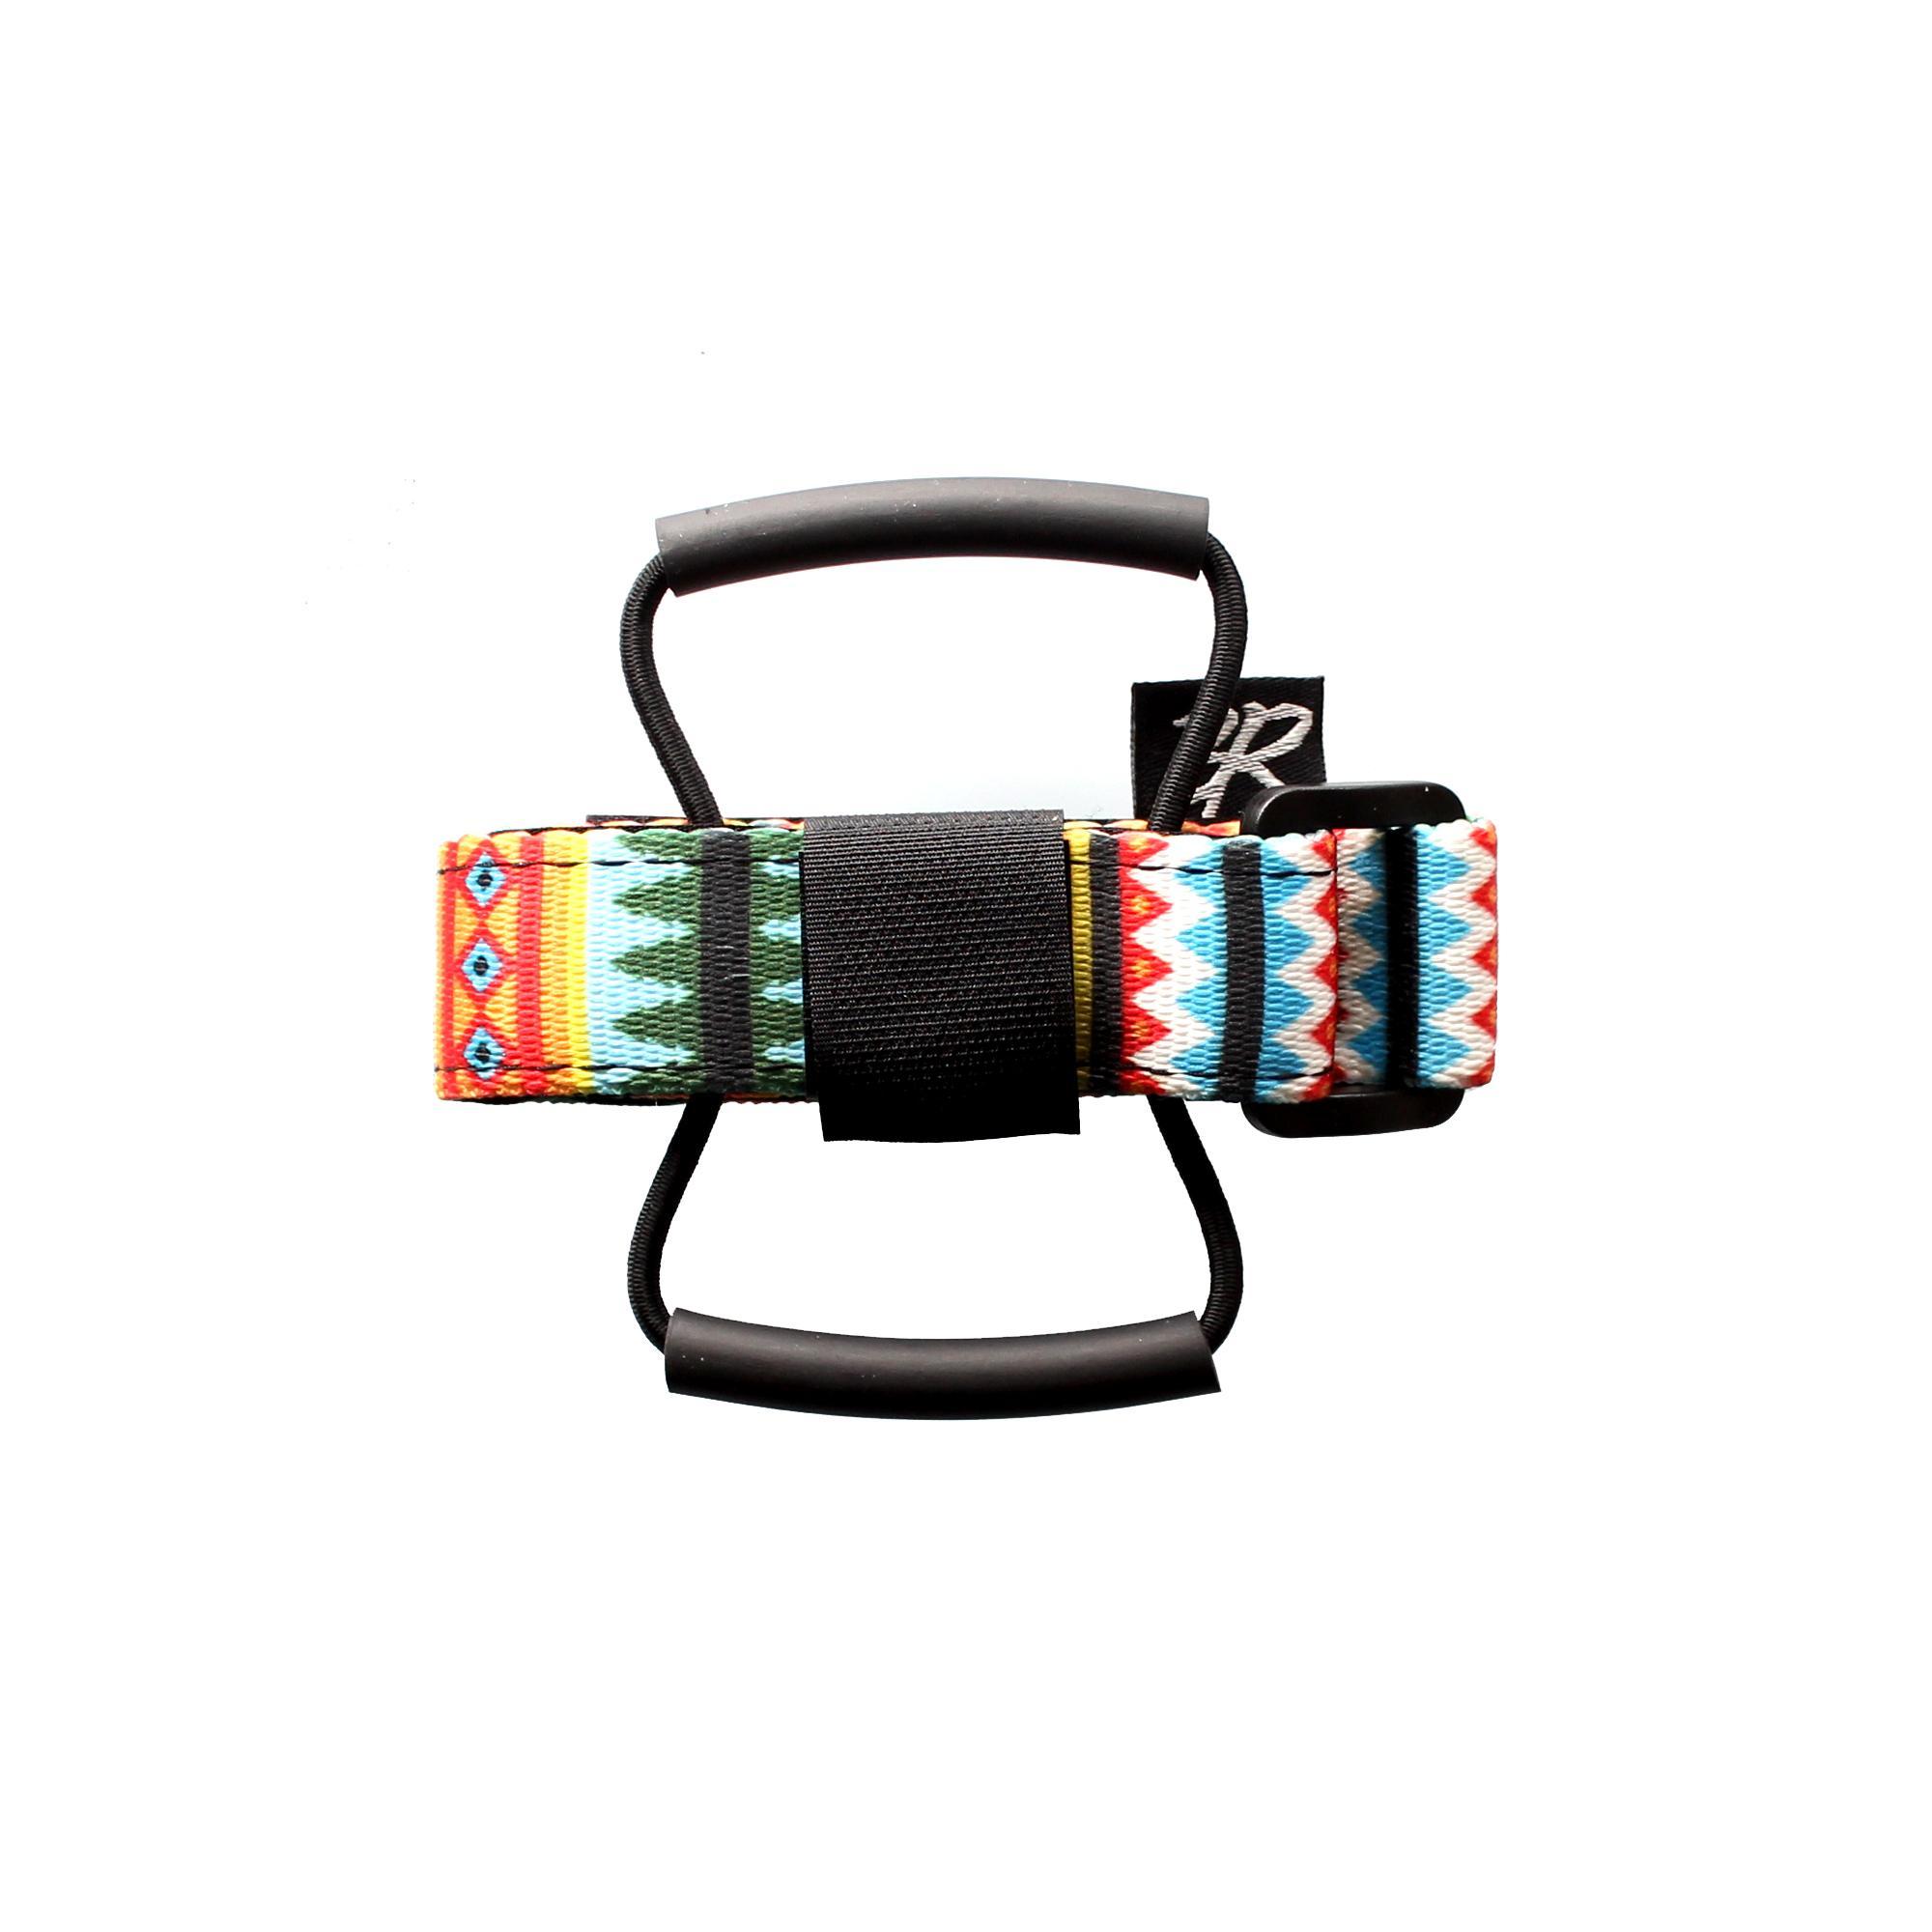 Back country research race strap for mtb frames in multicolour